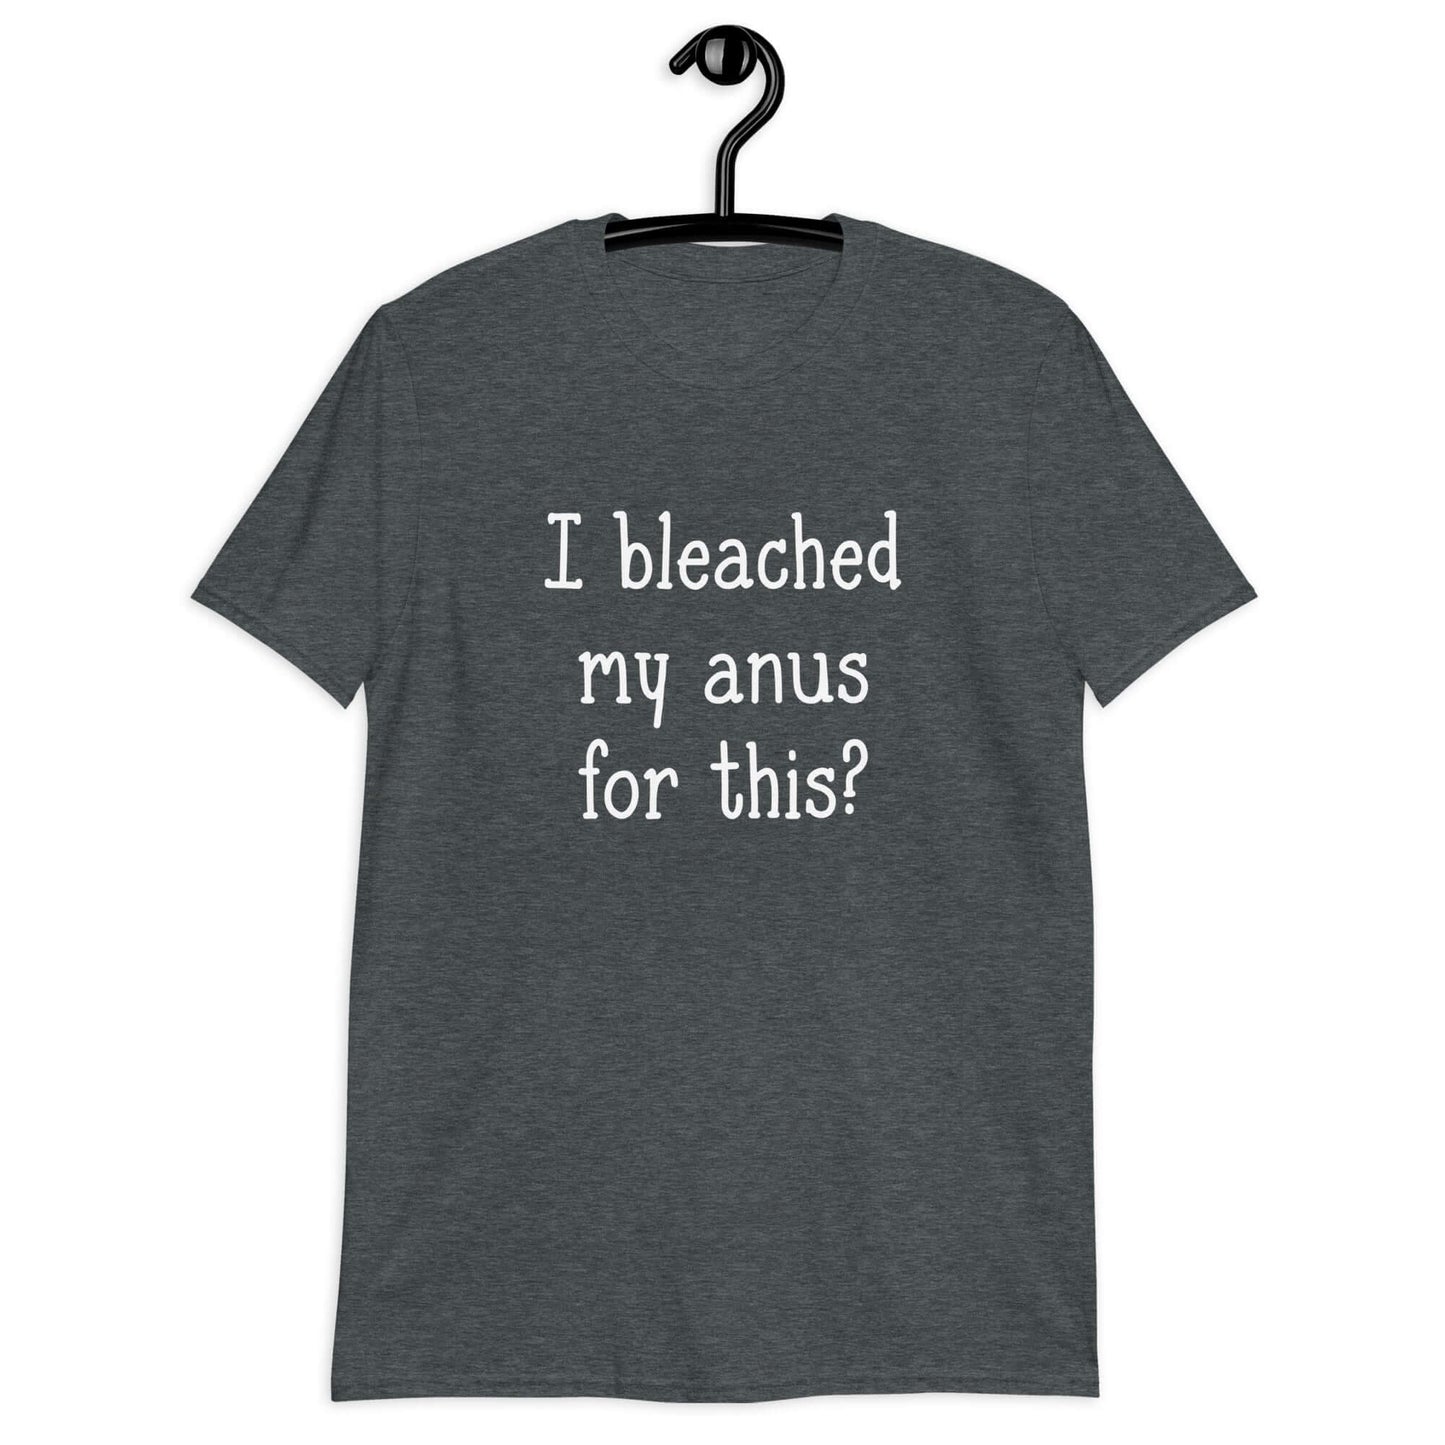 Anal bleaching graphic tee. Funny Short-Sleeve Unisex T-Shirt